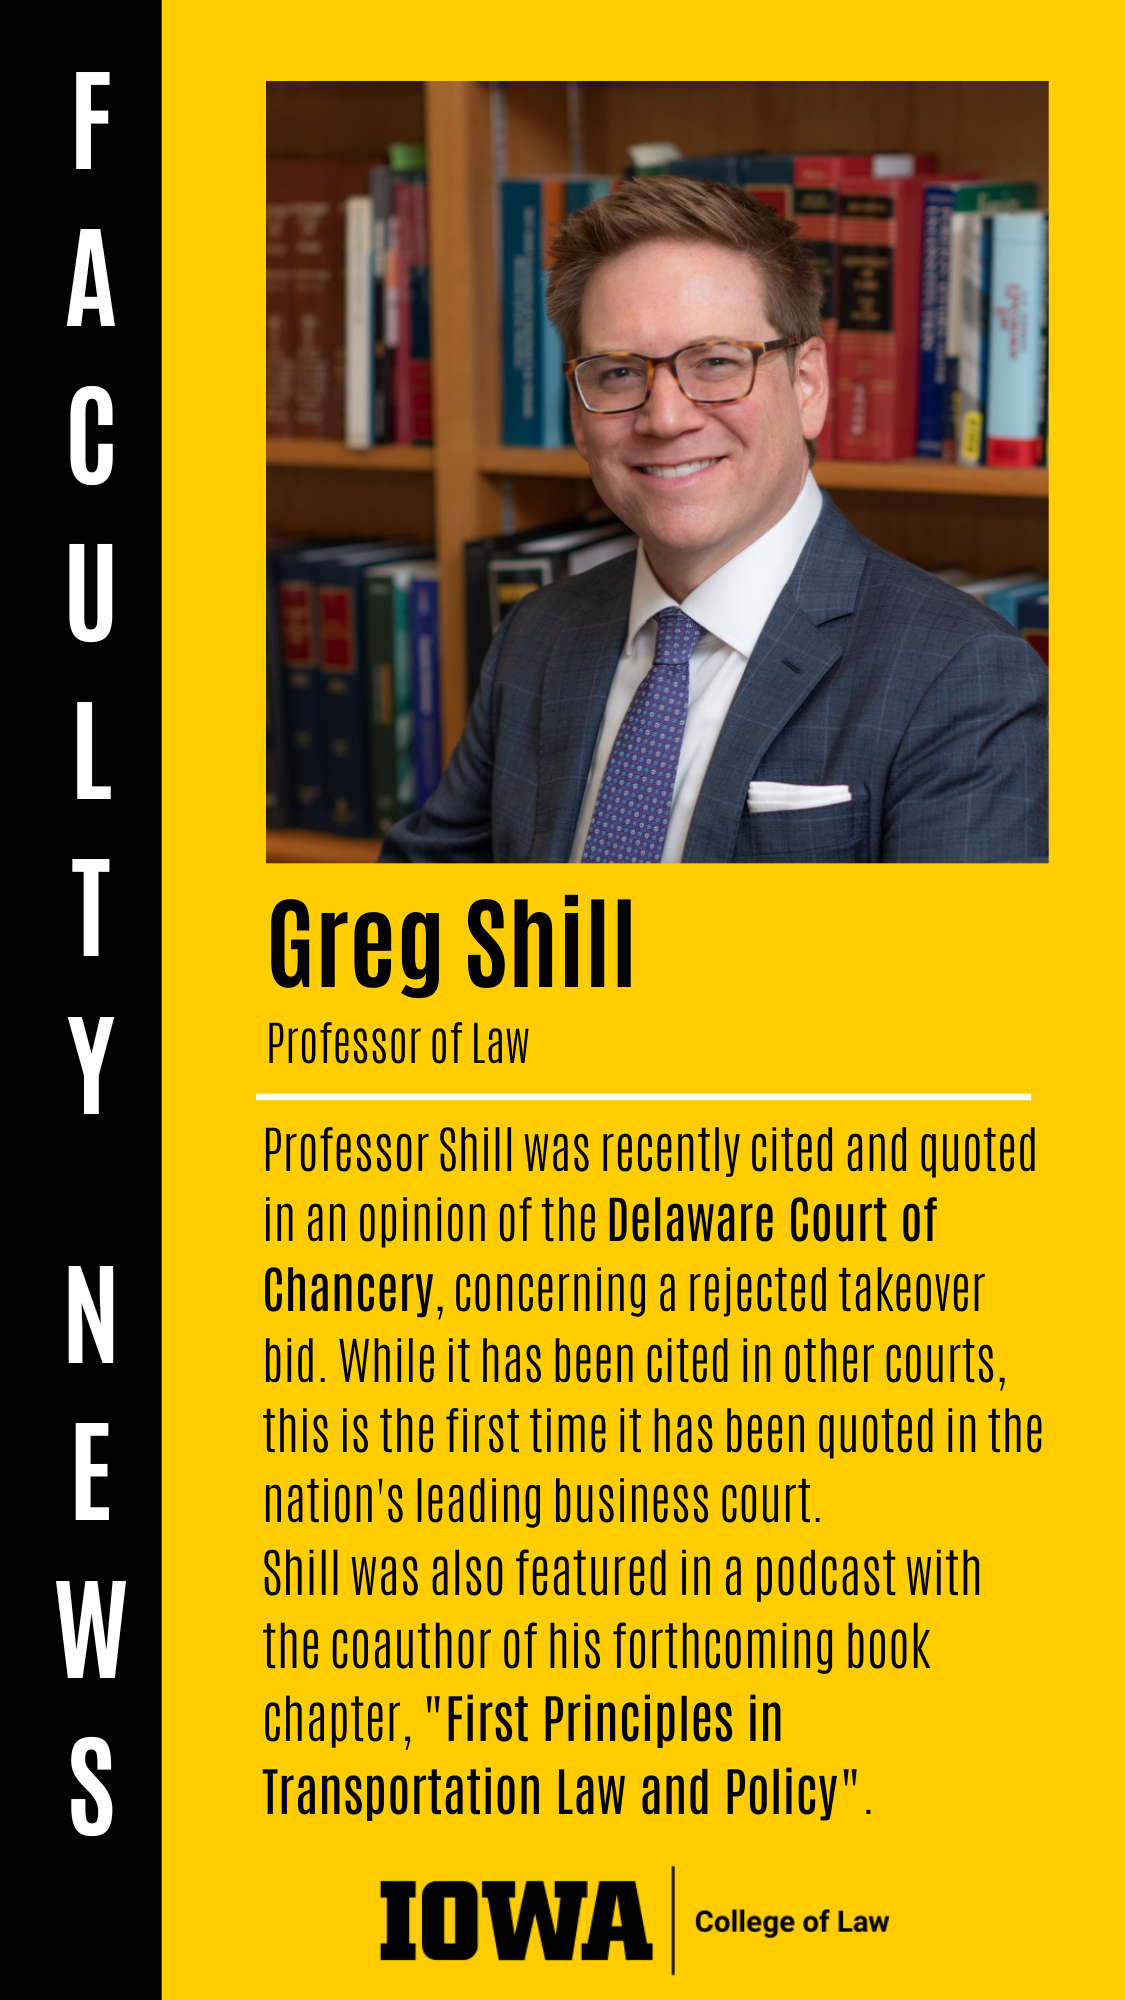 Greg Shill F A C U L T Y  N E W S Professor of Law Professor Shill was recently cited and quoted in an opinion of the Delaware Court of Chancery, concerning a rejected takeover bid. While it has been cited in other courts, this is the first time it has been quoted in the nation's leading business court. Shill was also featured in a podcast with the coauthor of his forthcoming book chapter, "First Principles in Transportation Law and Policy".